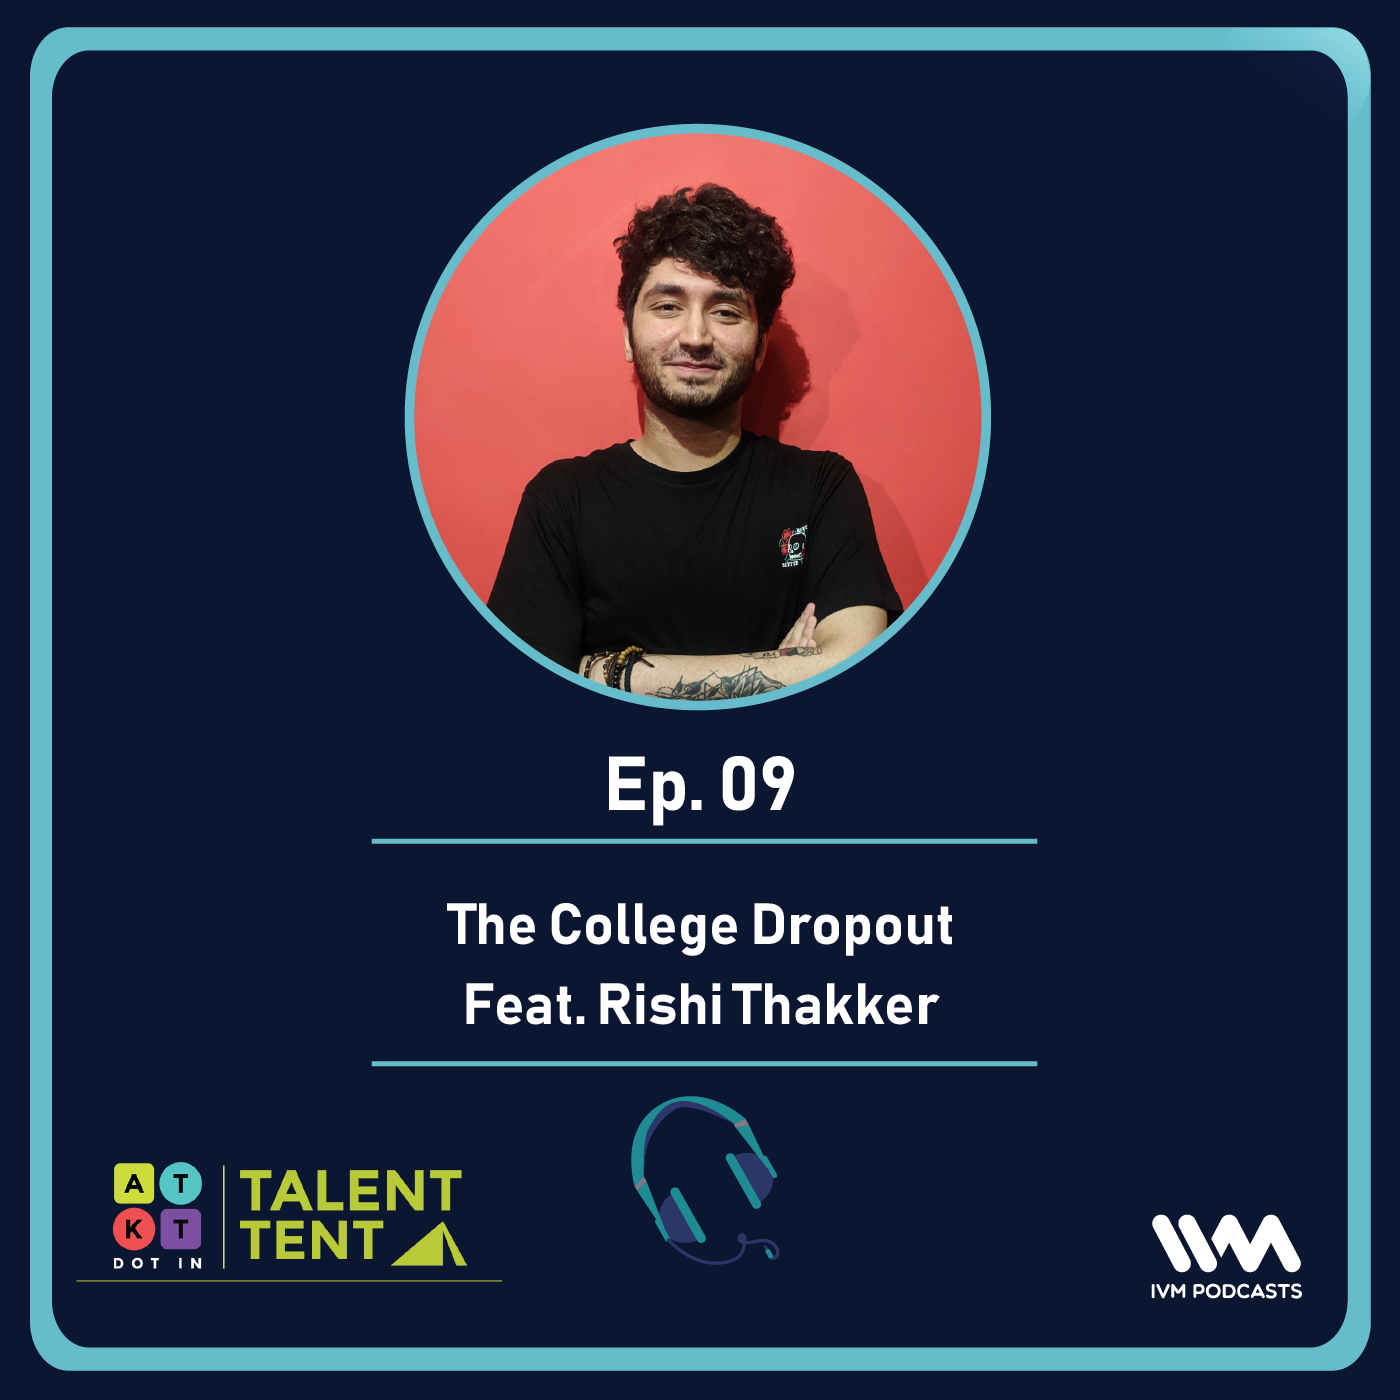 Ep. 09: The College Dropout